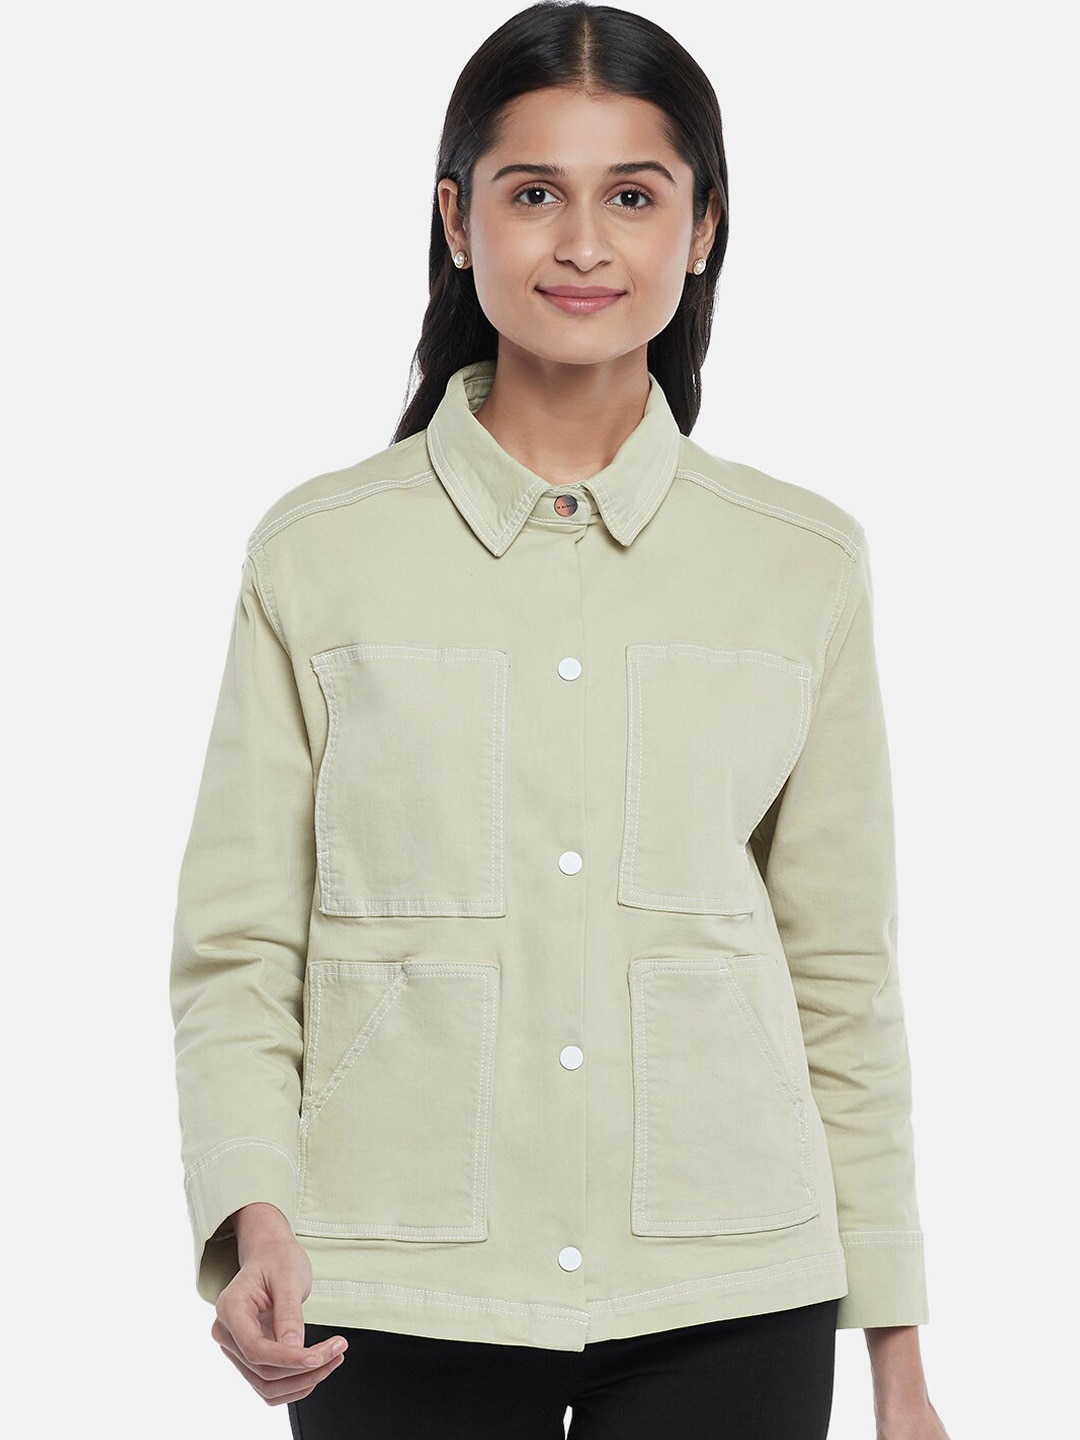 SF JEANS by Pantaloons Women Green Longline Tailored Jacket Price in India